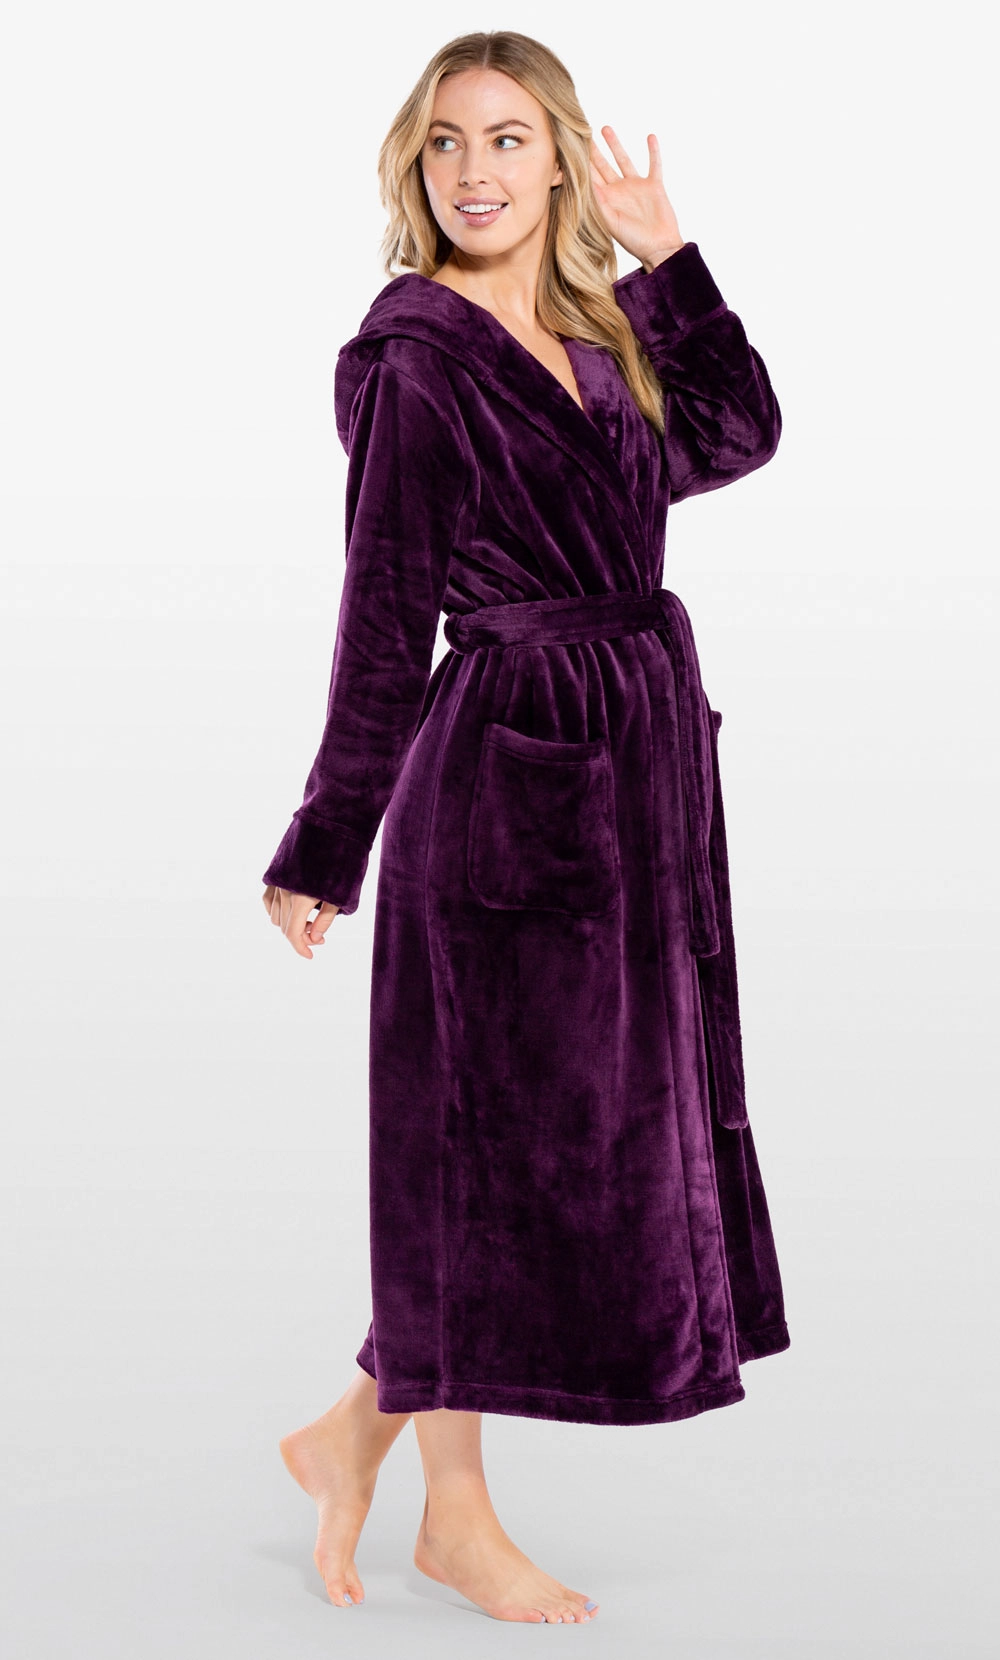 SKIMS on X: SKIMS Velour Robe - available now in 4 colors and in